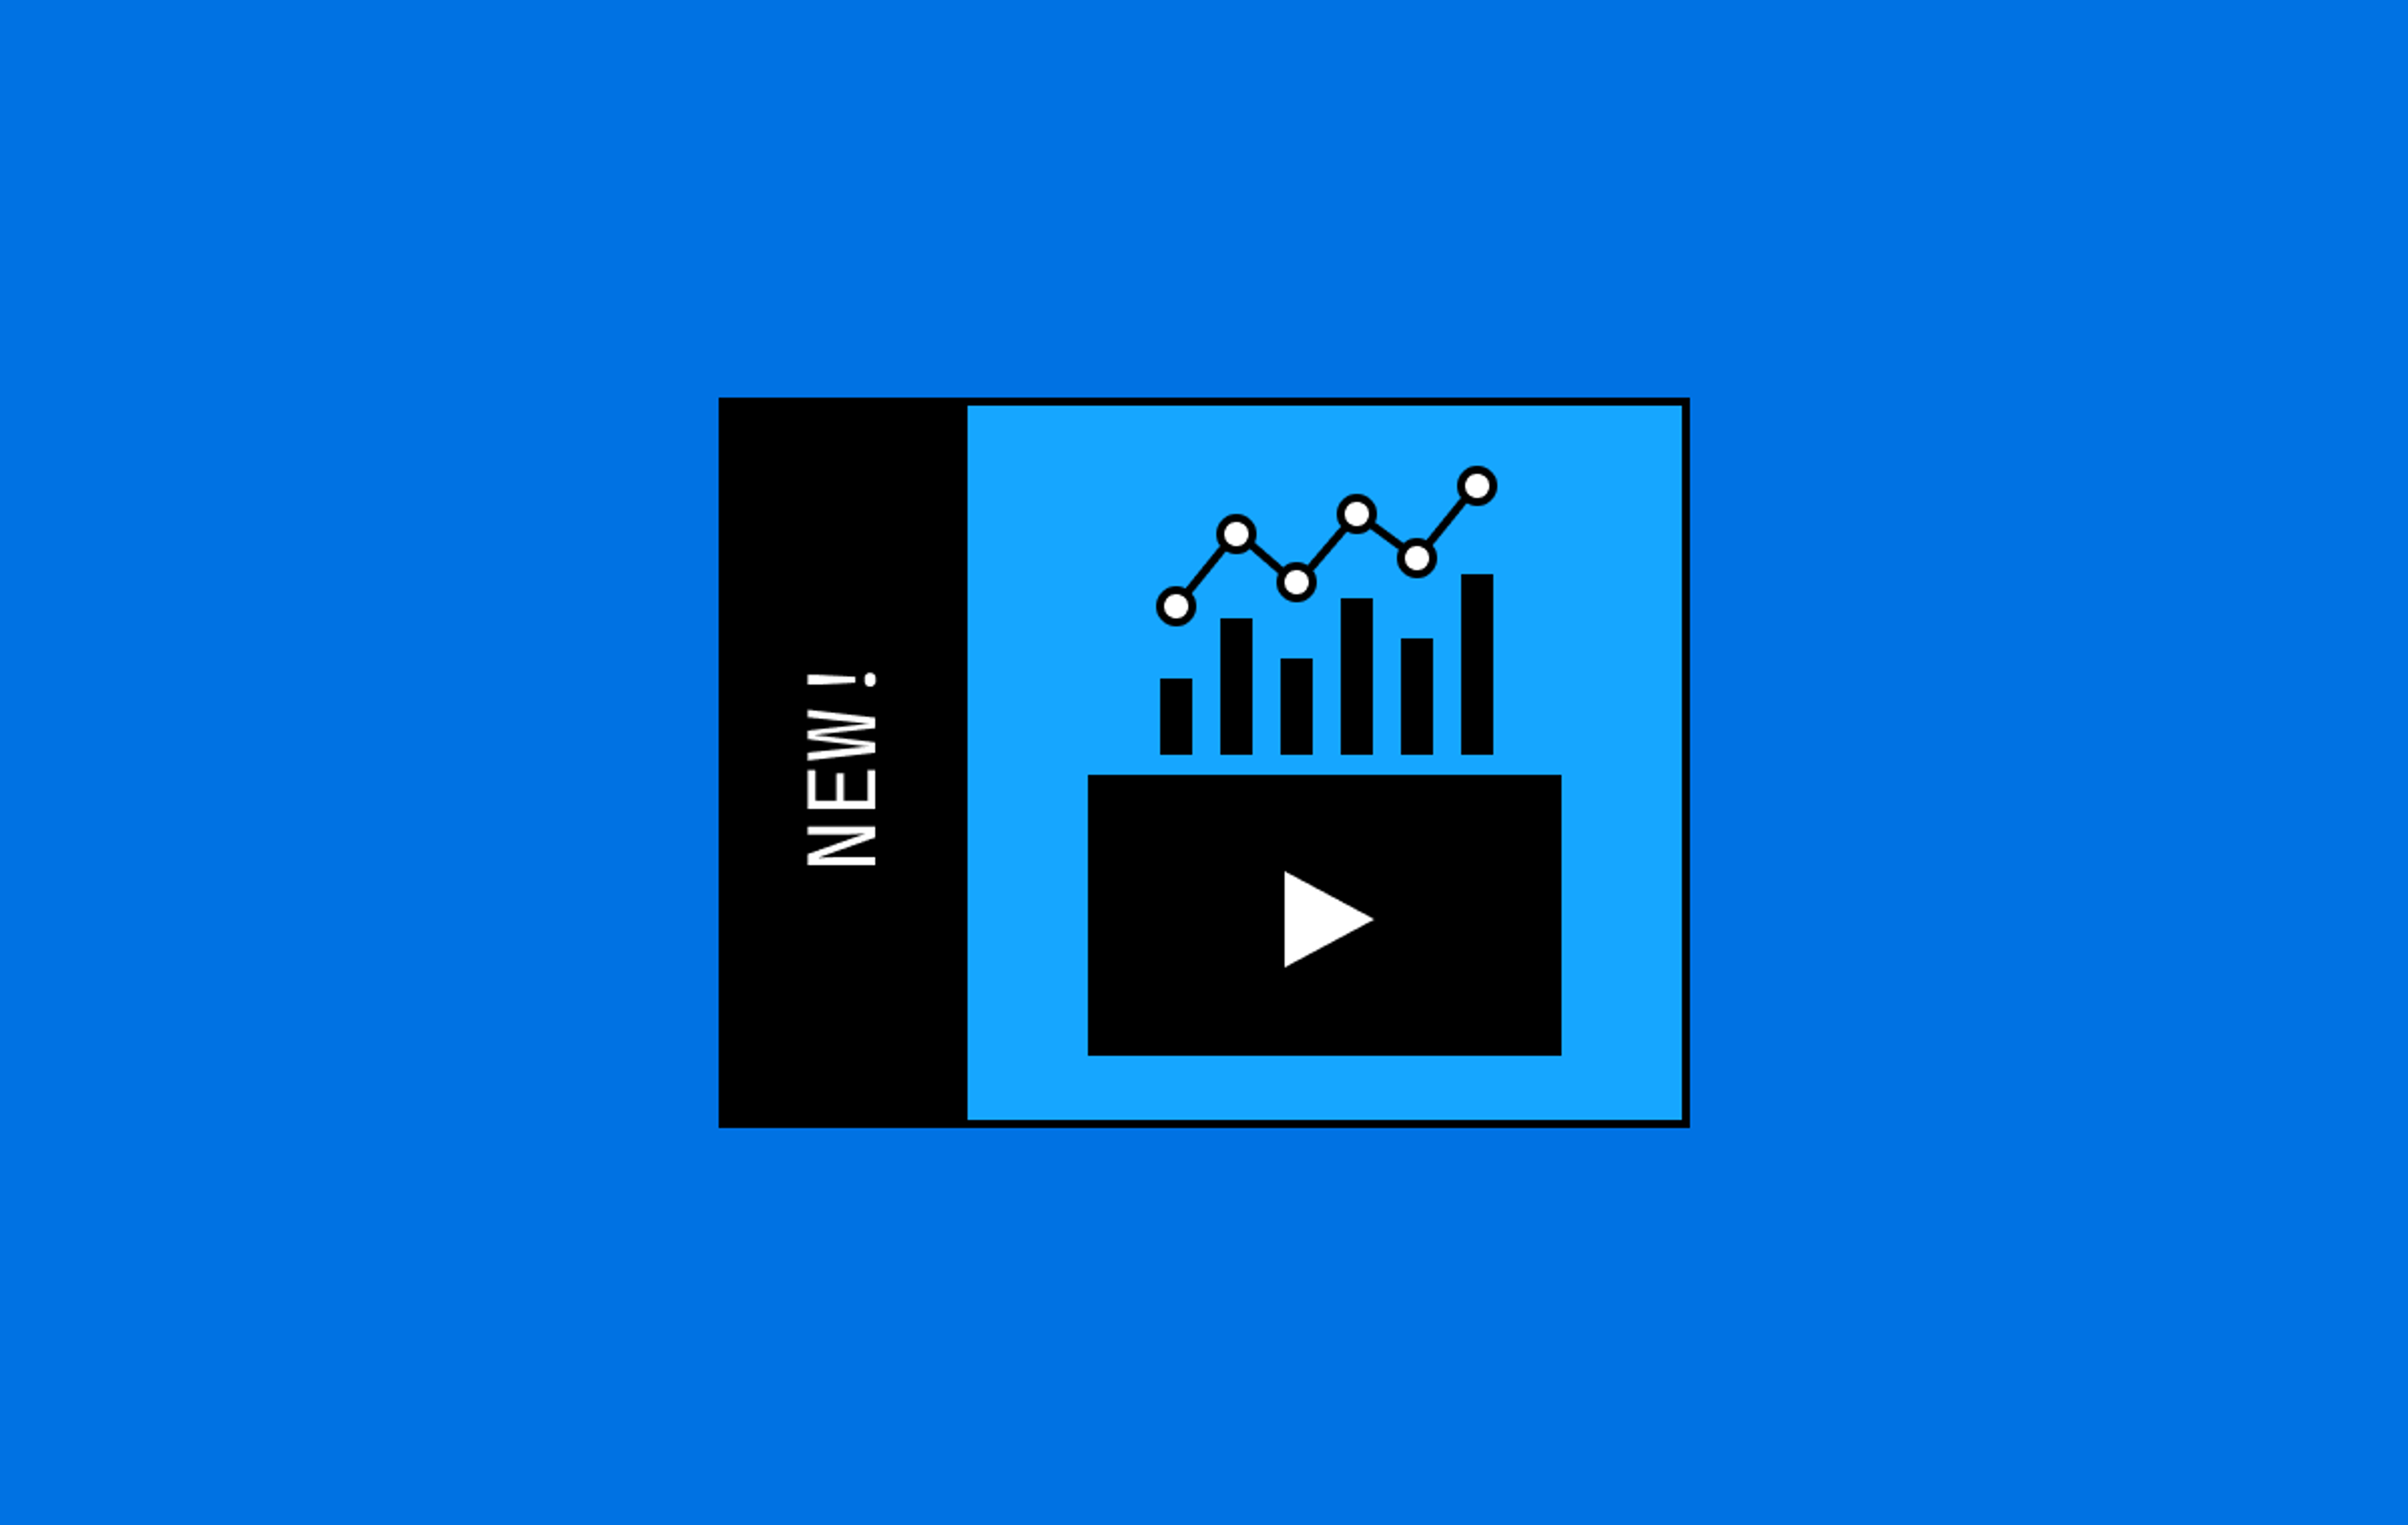 On a blue background an icon of a video player with a graph above it with the word new written beside it